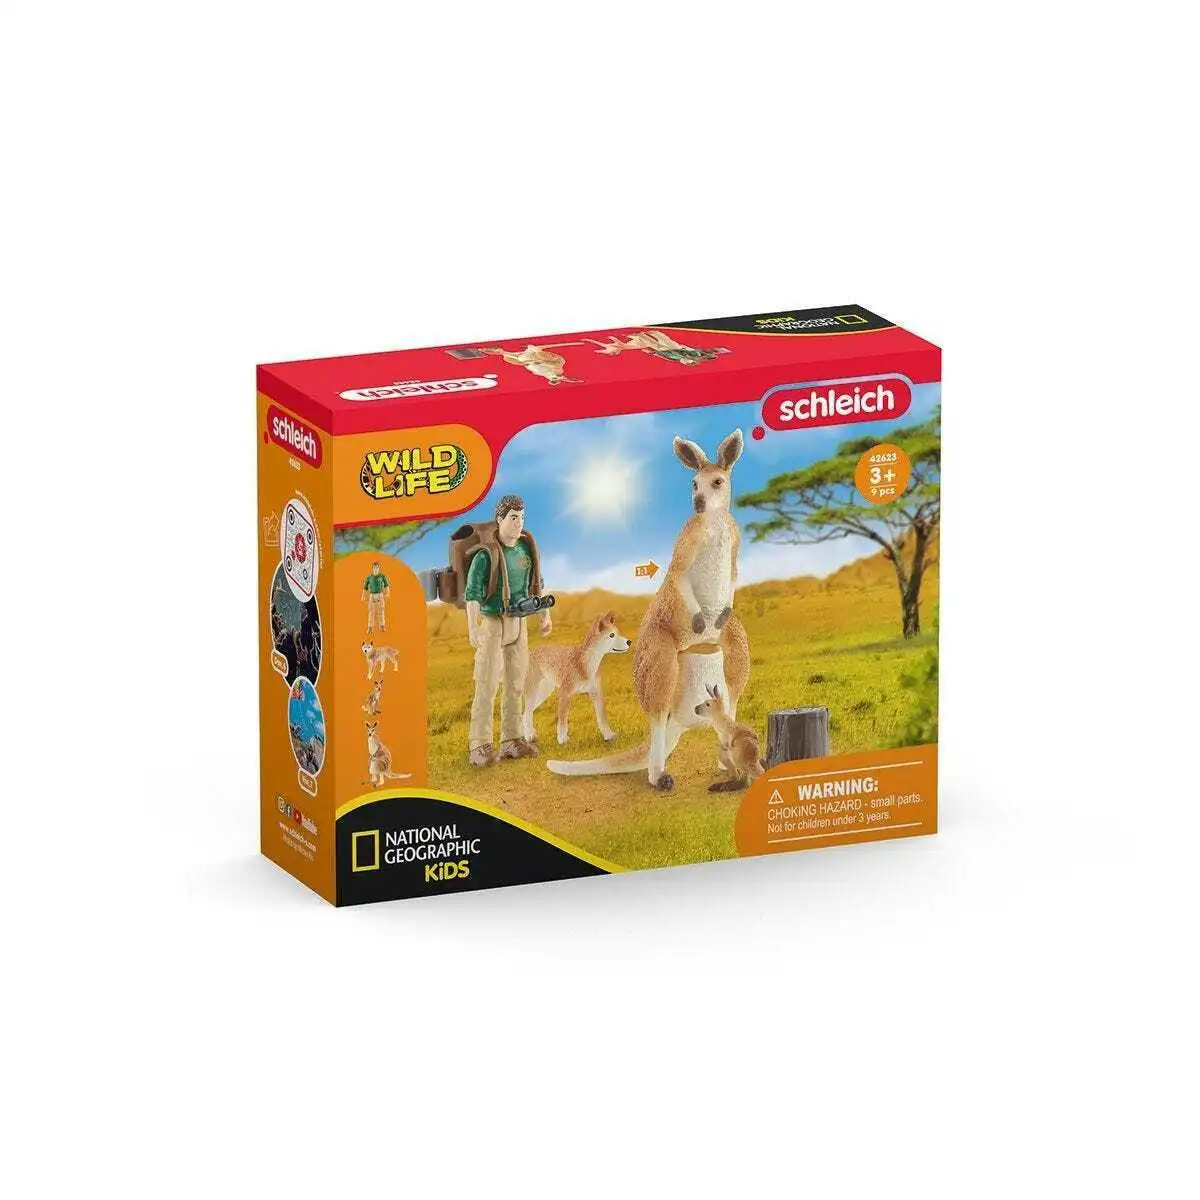 Schleich - National Geographic Kids - Outback Adventures - Wild Life Animal Playset